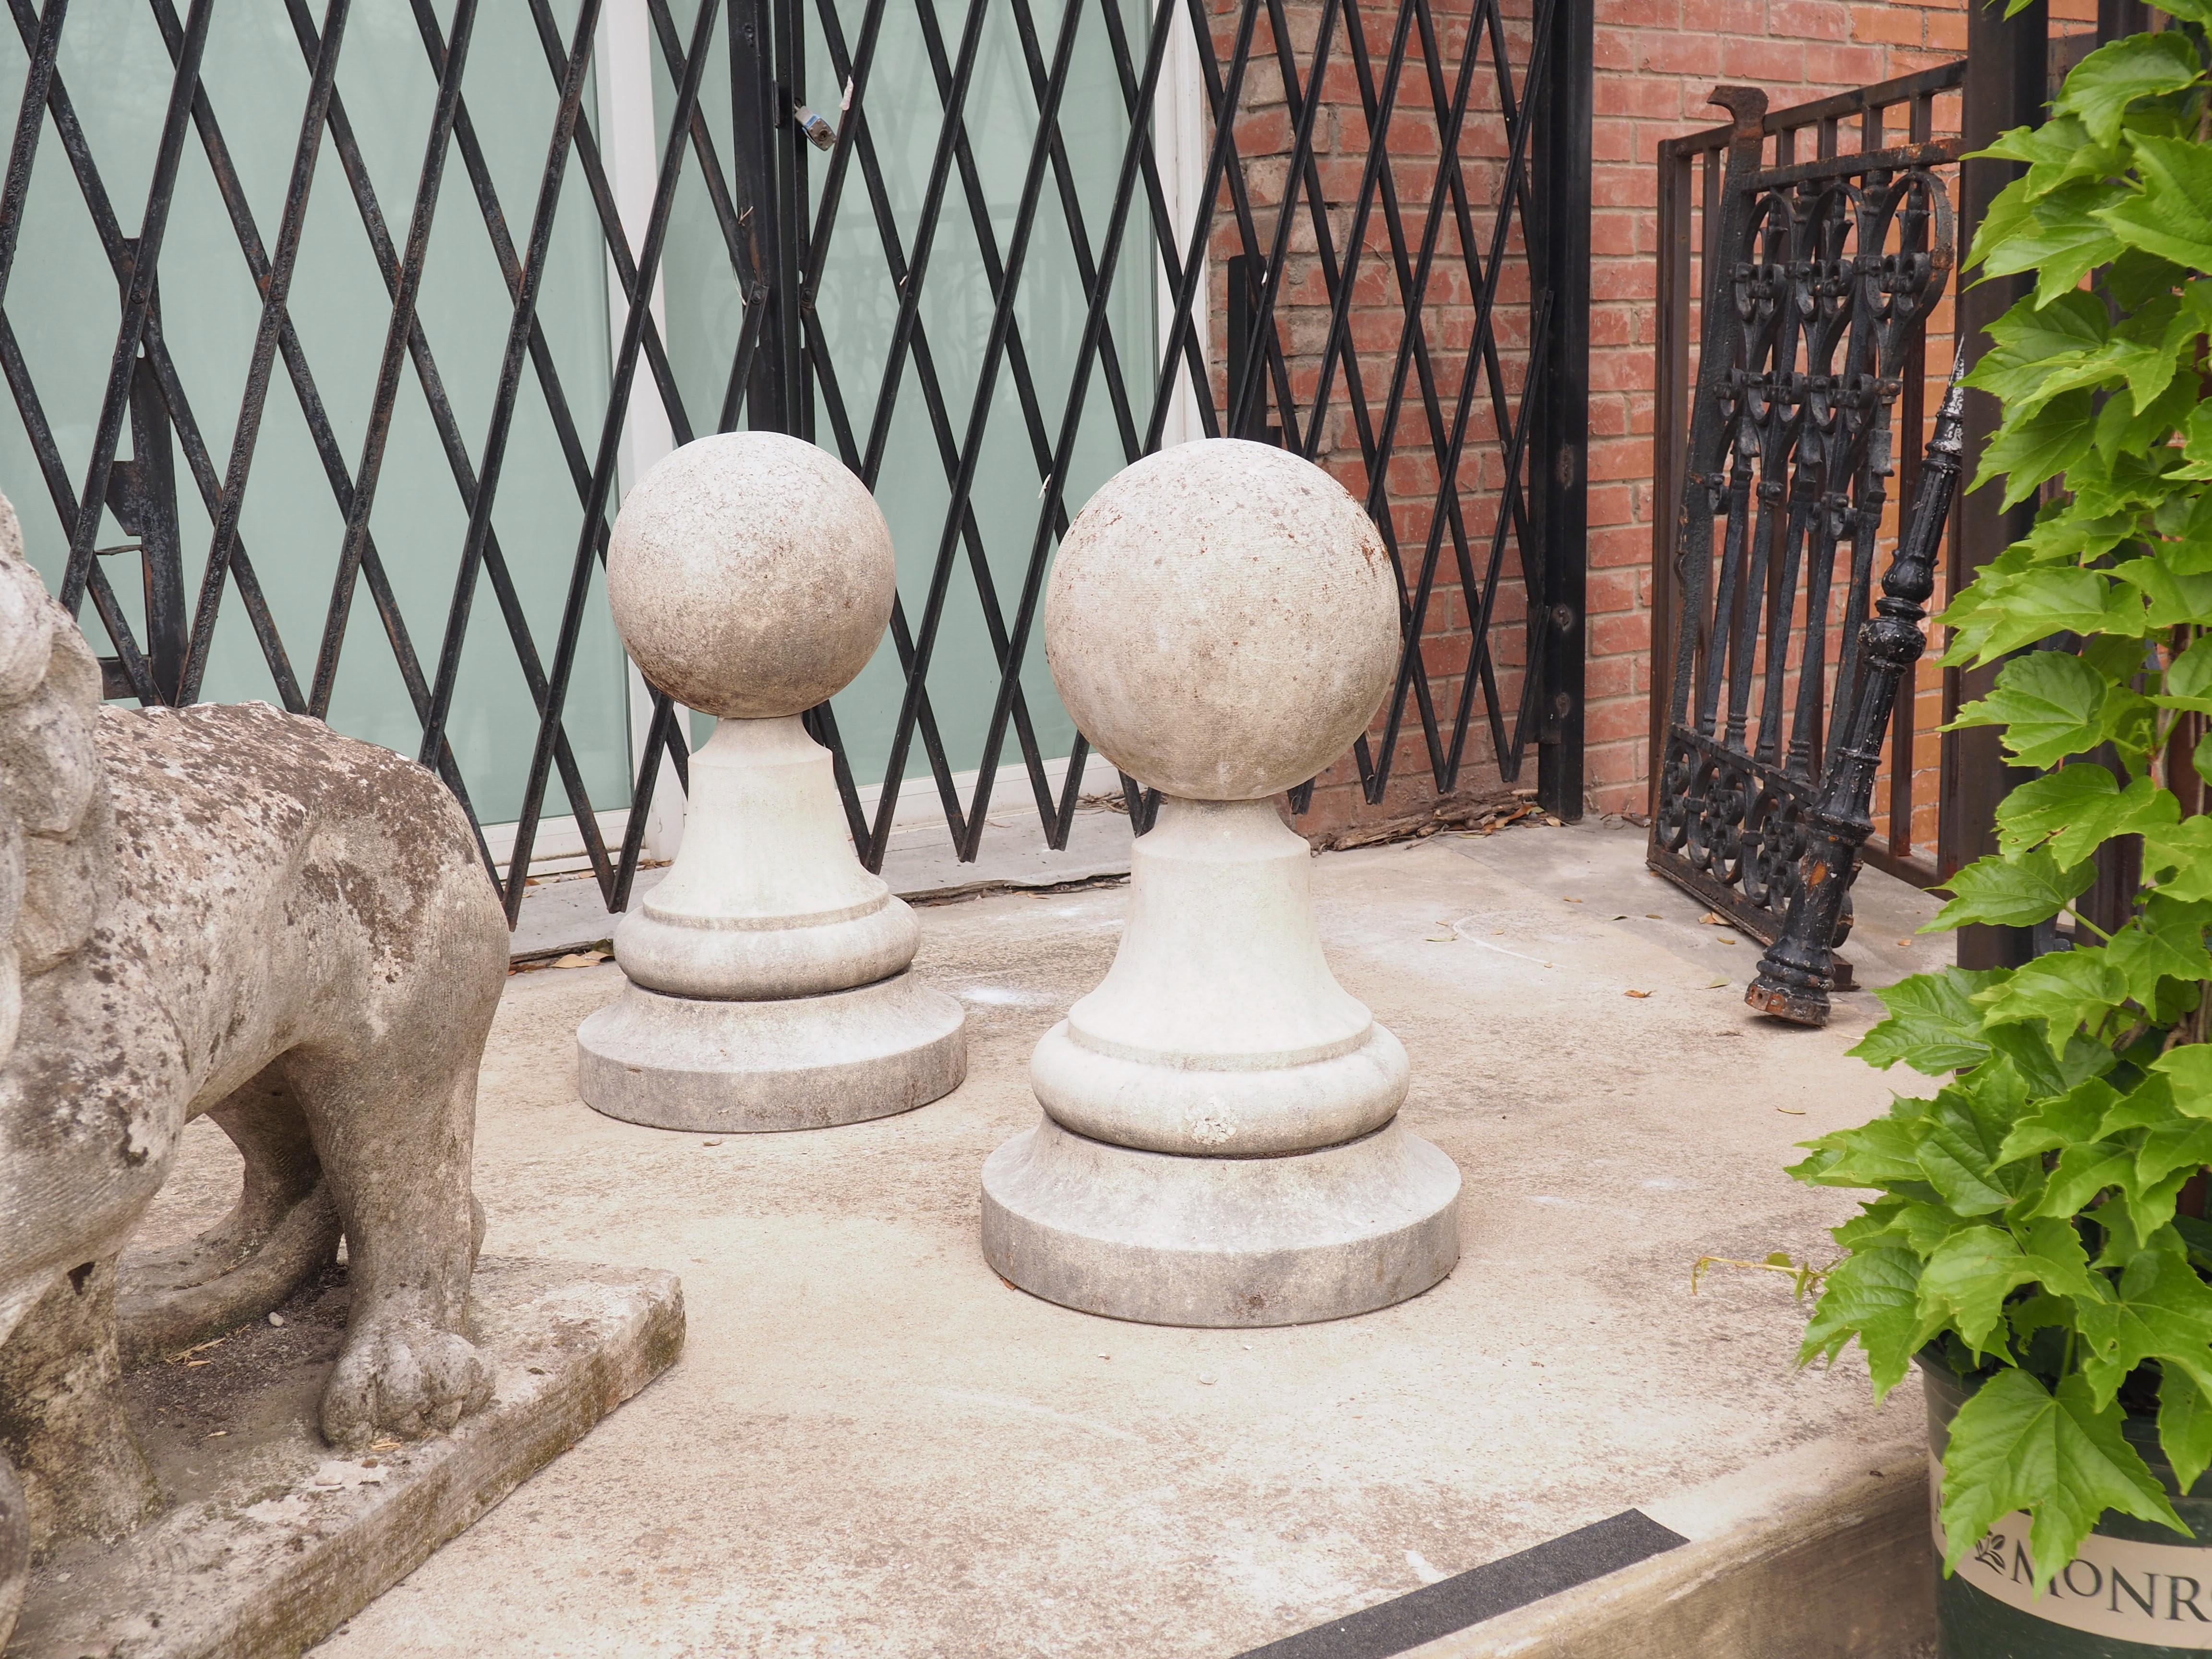 This large pair of garden ball finials have been hand-carved from Italian limestone. Ball finials such as this can often be seen flanking the entry of gardens at Italian villas. Both balls are roughly 14 ¾ inches in diameter and sit atop circular